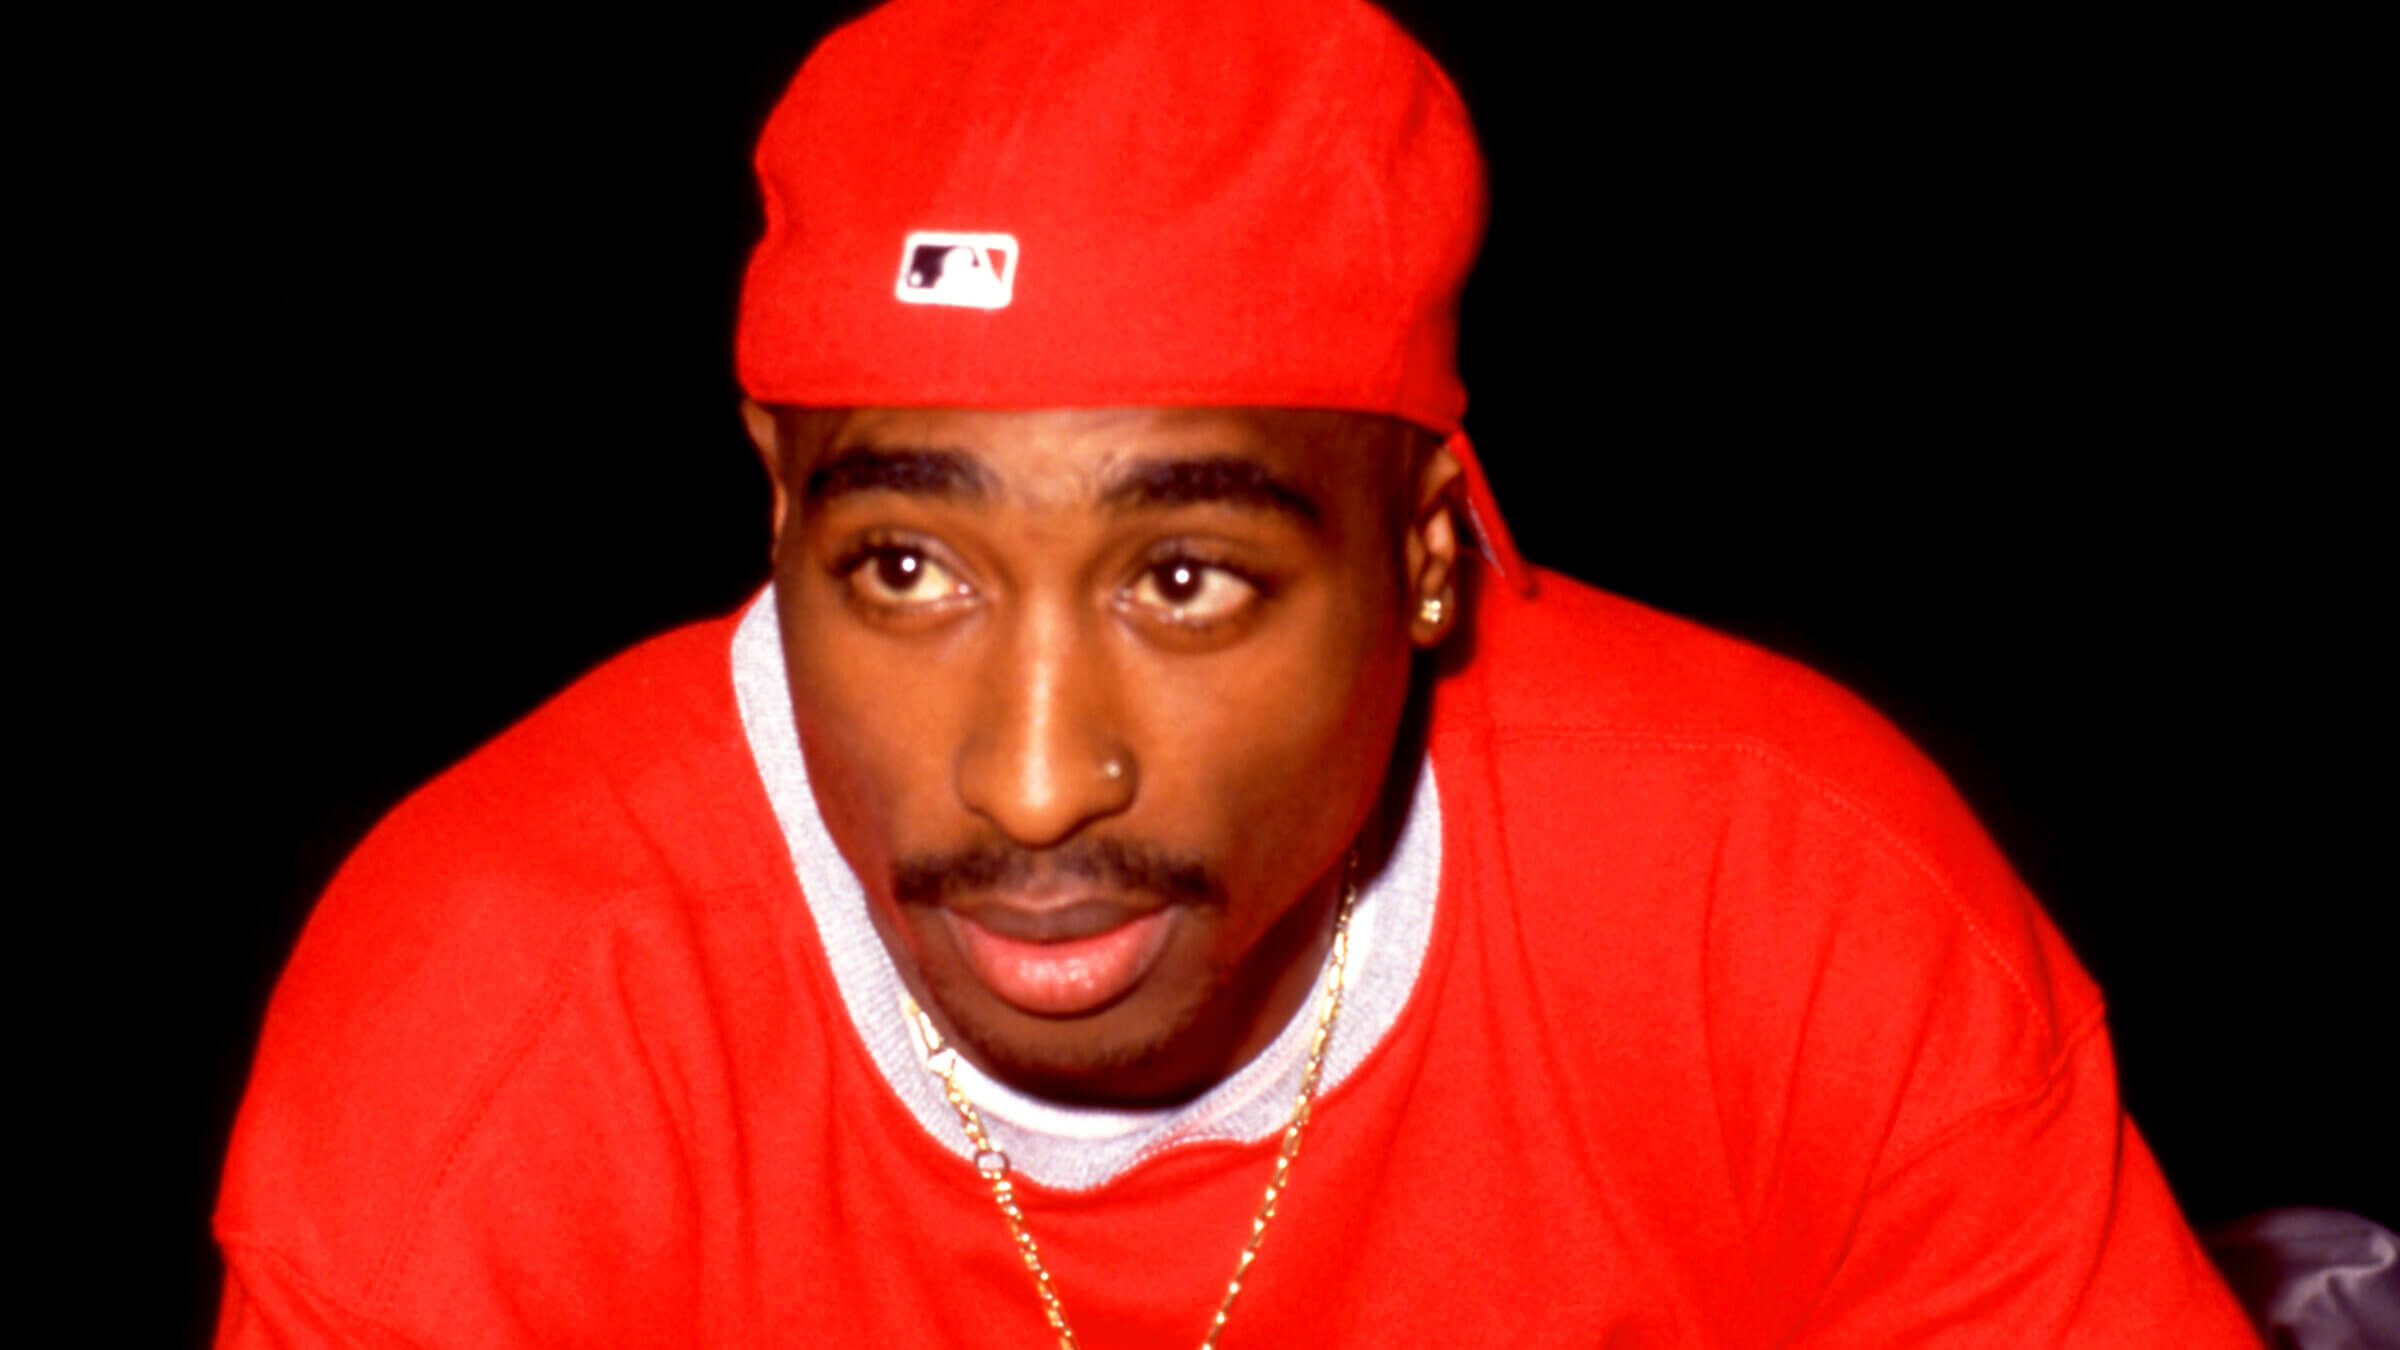 2pac's Authorized Biography Coming In 2023